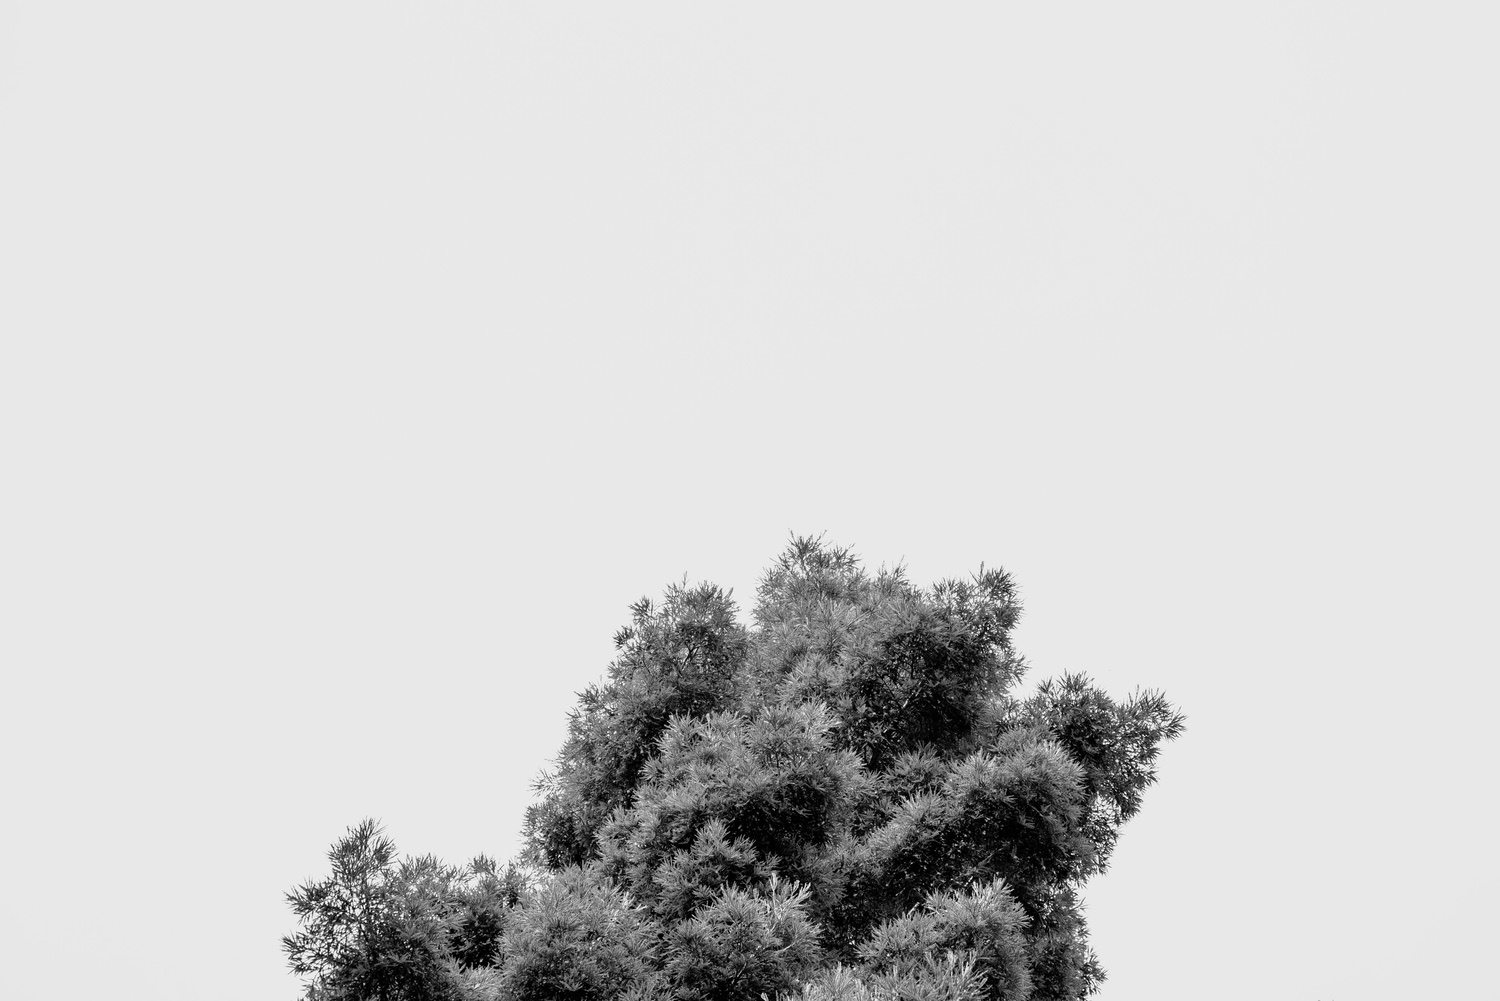 A black and white image of a tree